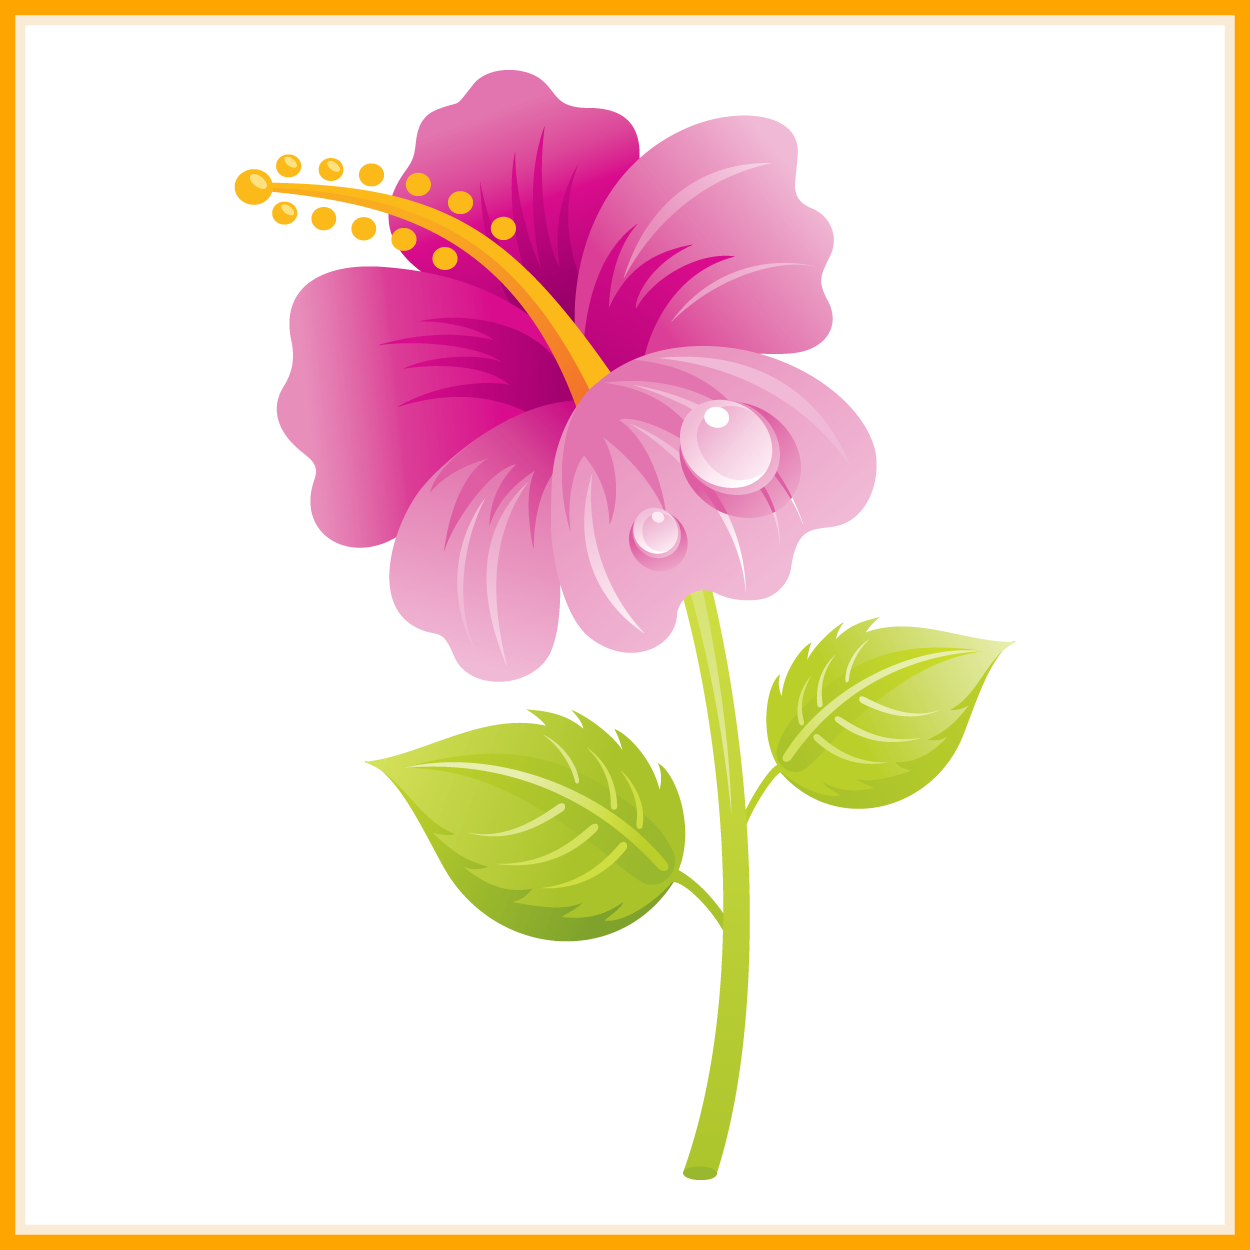 orchid clipart moon